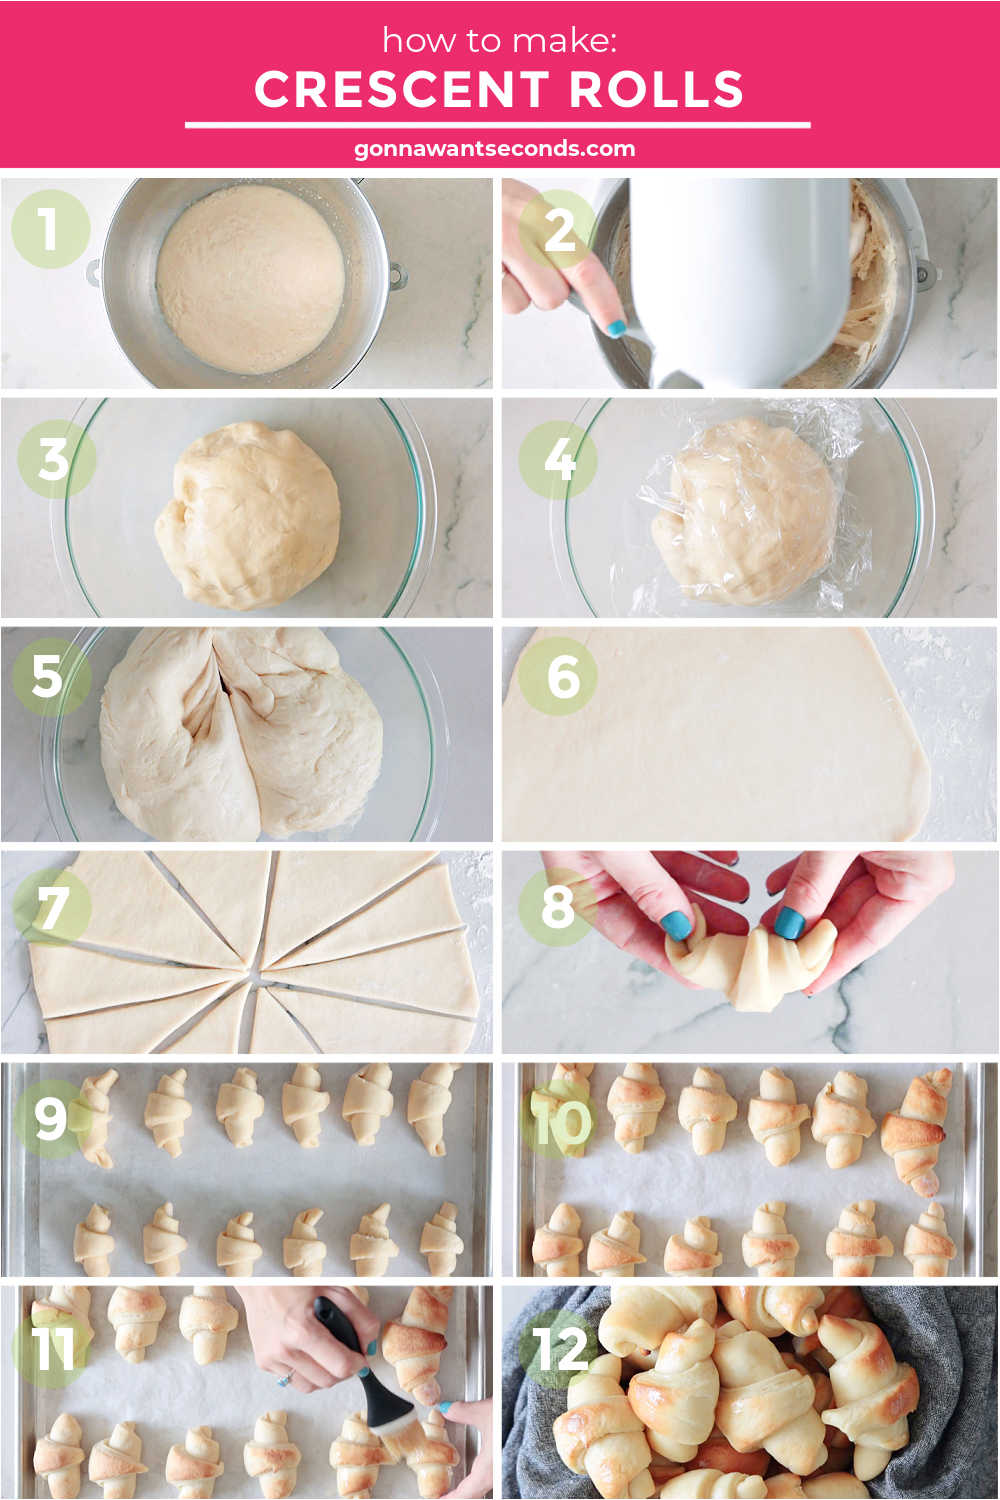 step by step how to make crescent rolls